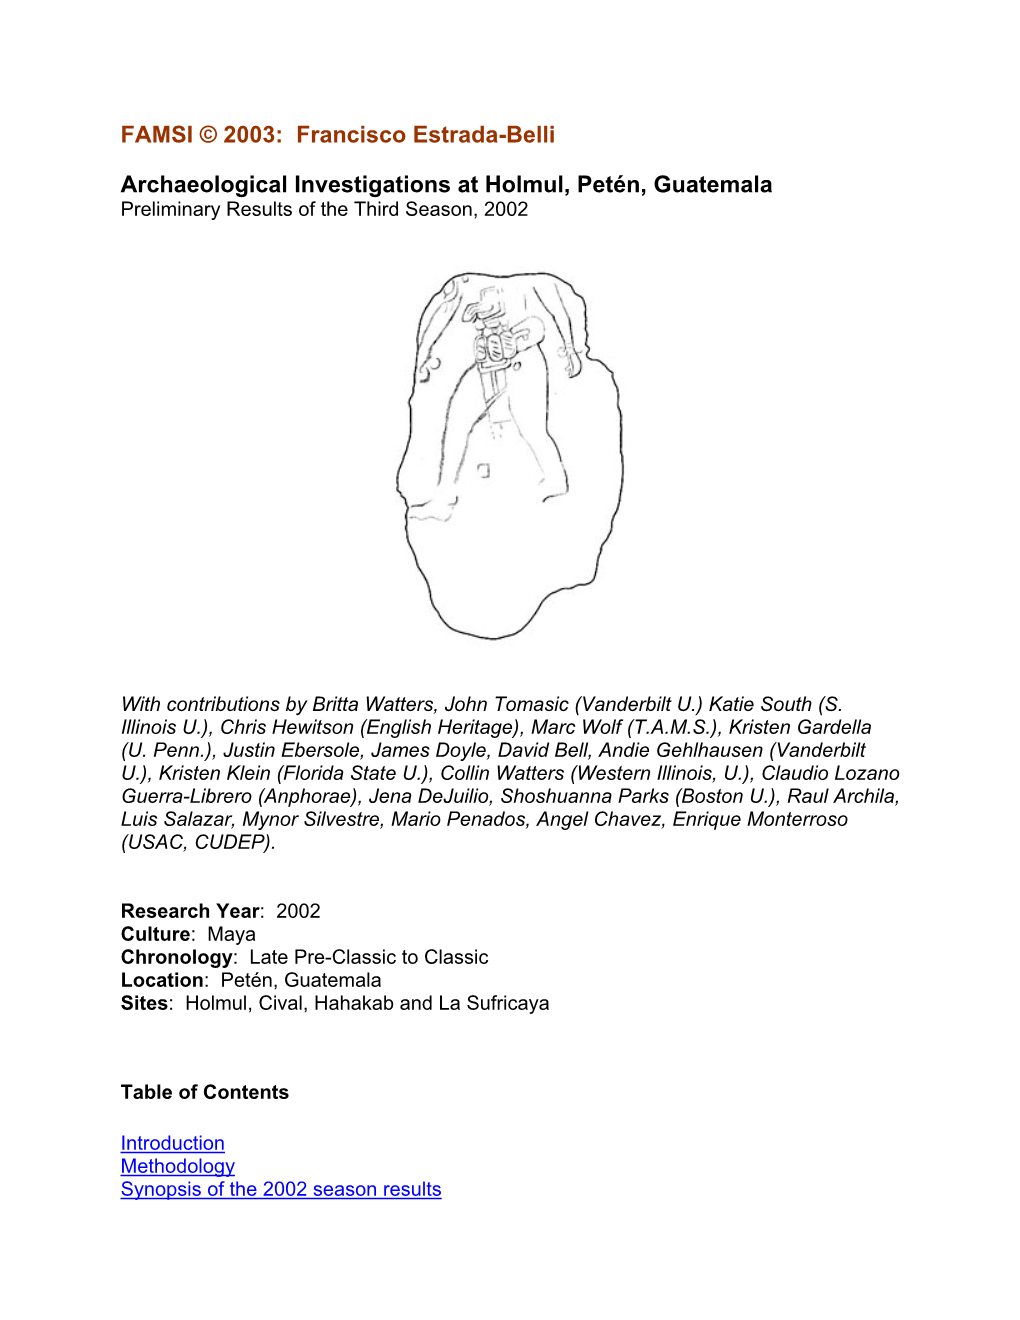 Archaeological Investigations at Holmul, Petén, Guatemala Preliminary Results of the Third Season, 2002